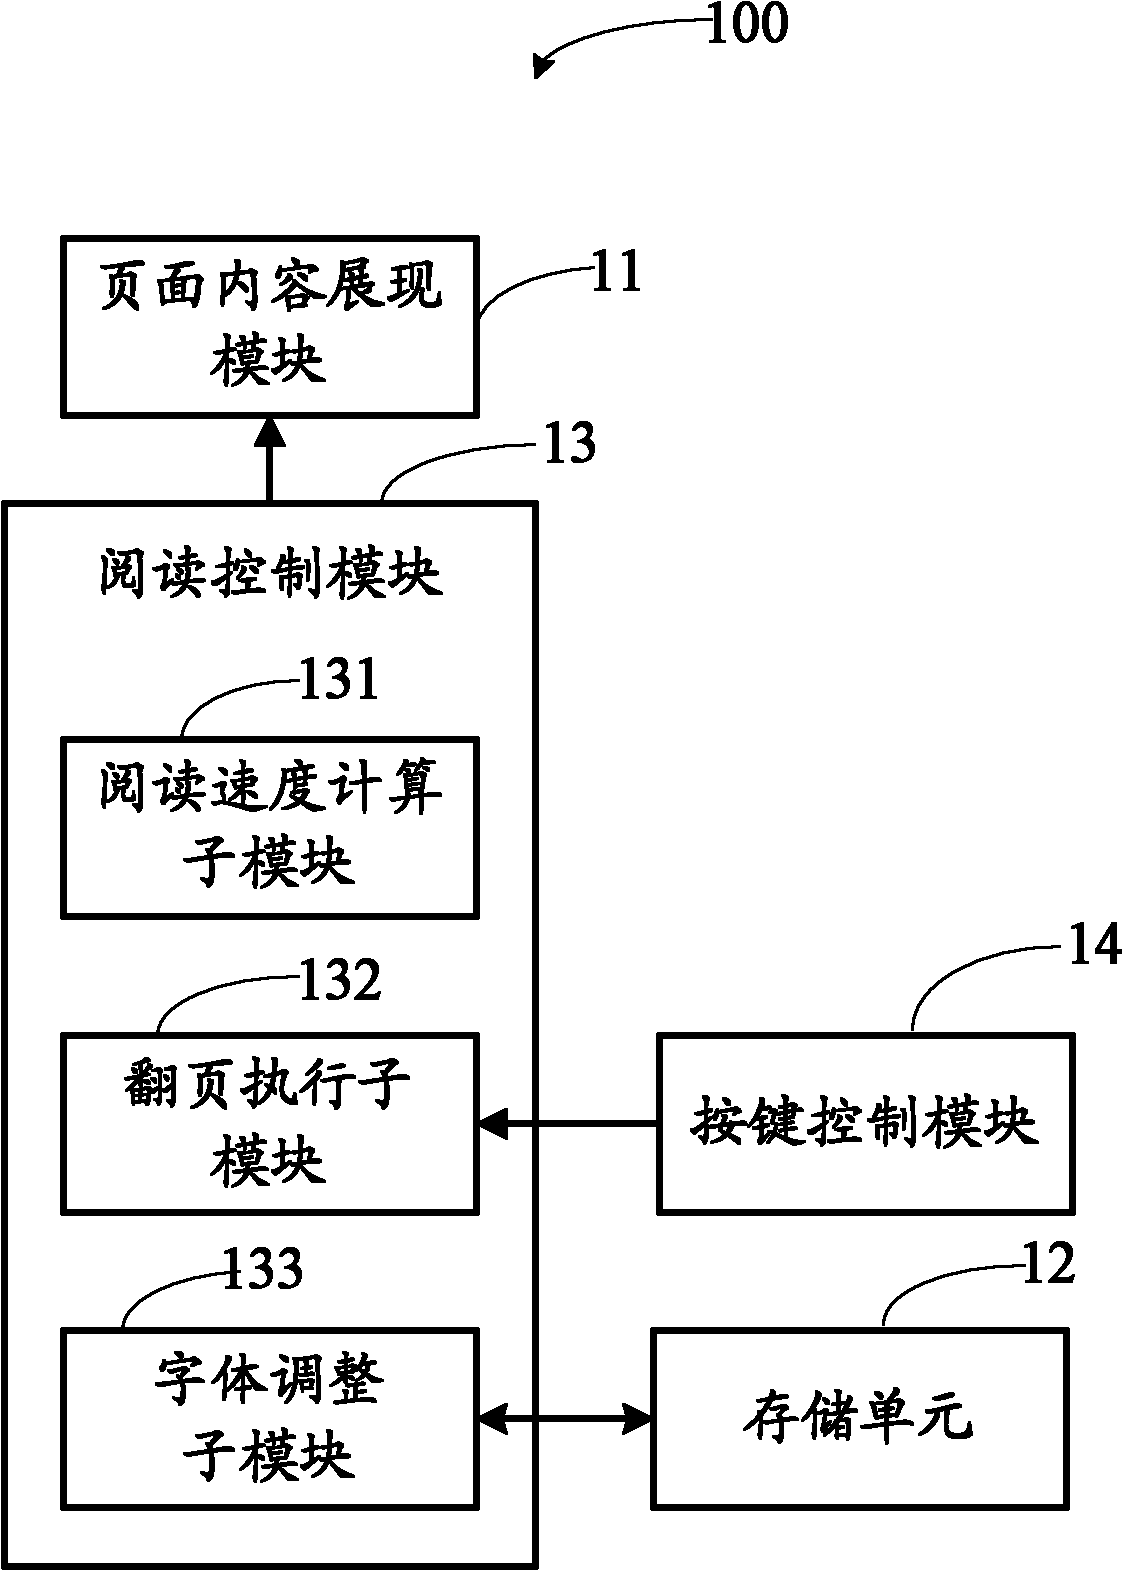 Method and device for text introduction and method for determining introduction speed automatically